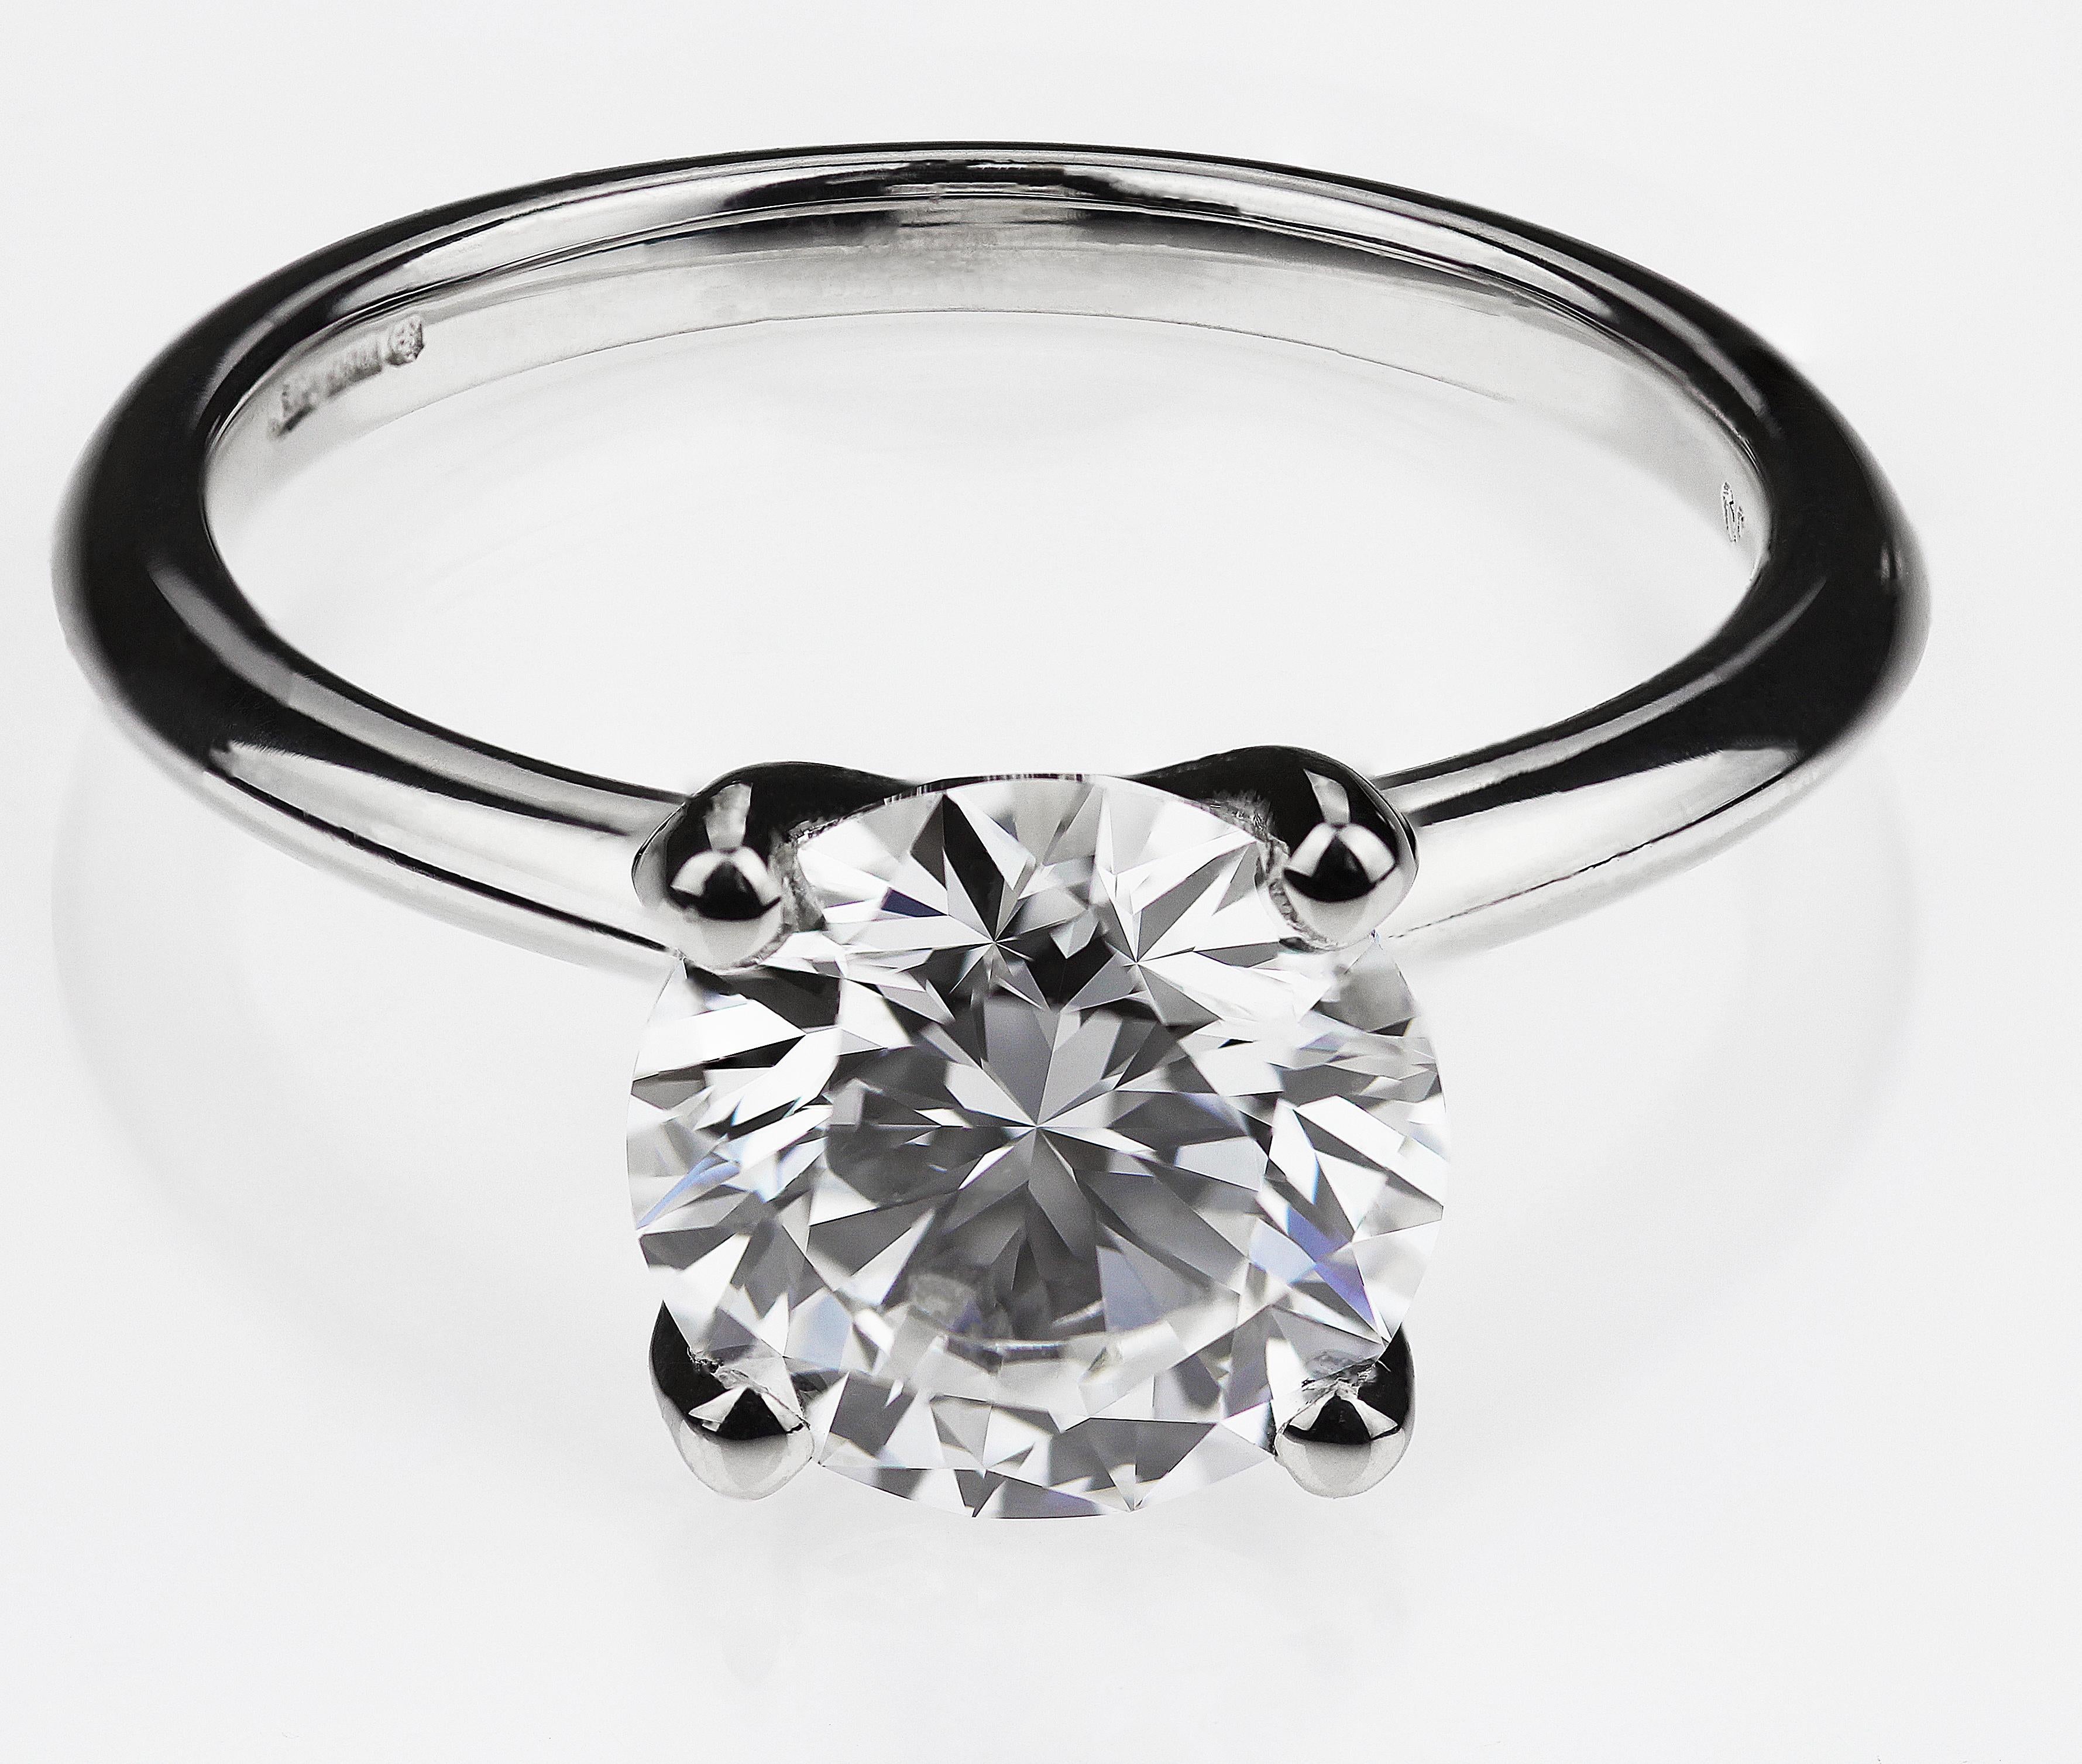 A stunning piece for your fine jewellery collection to add a touch of elegance or create a bridal jewellery set inspired by classic design with this stunning solitaire diamond ring, featuring a glistening diamond. This diamond is the highest colour